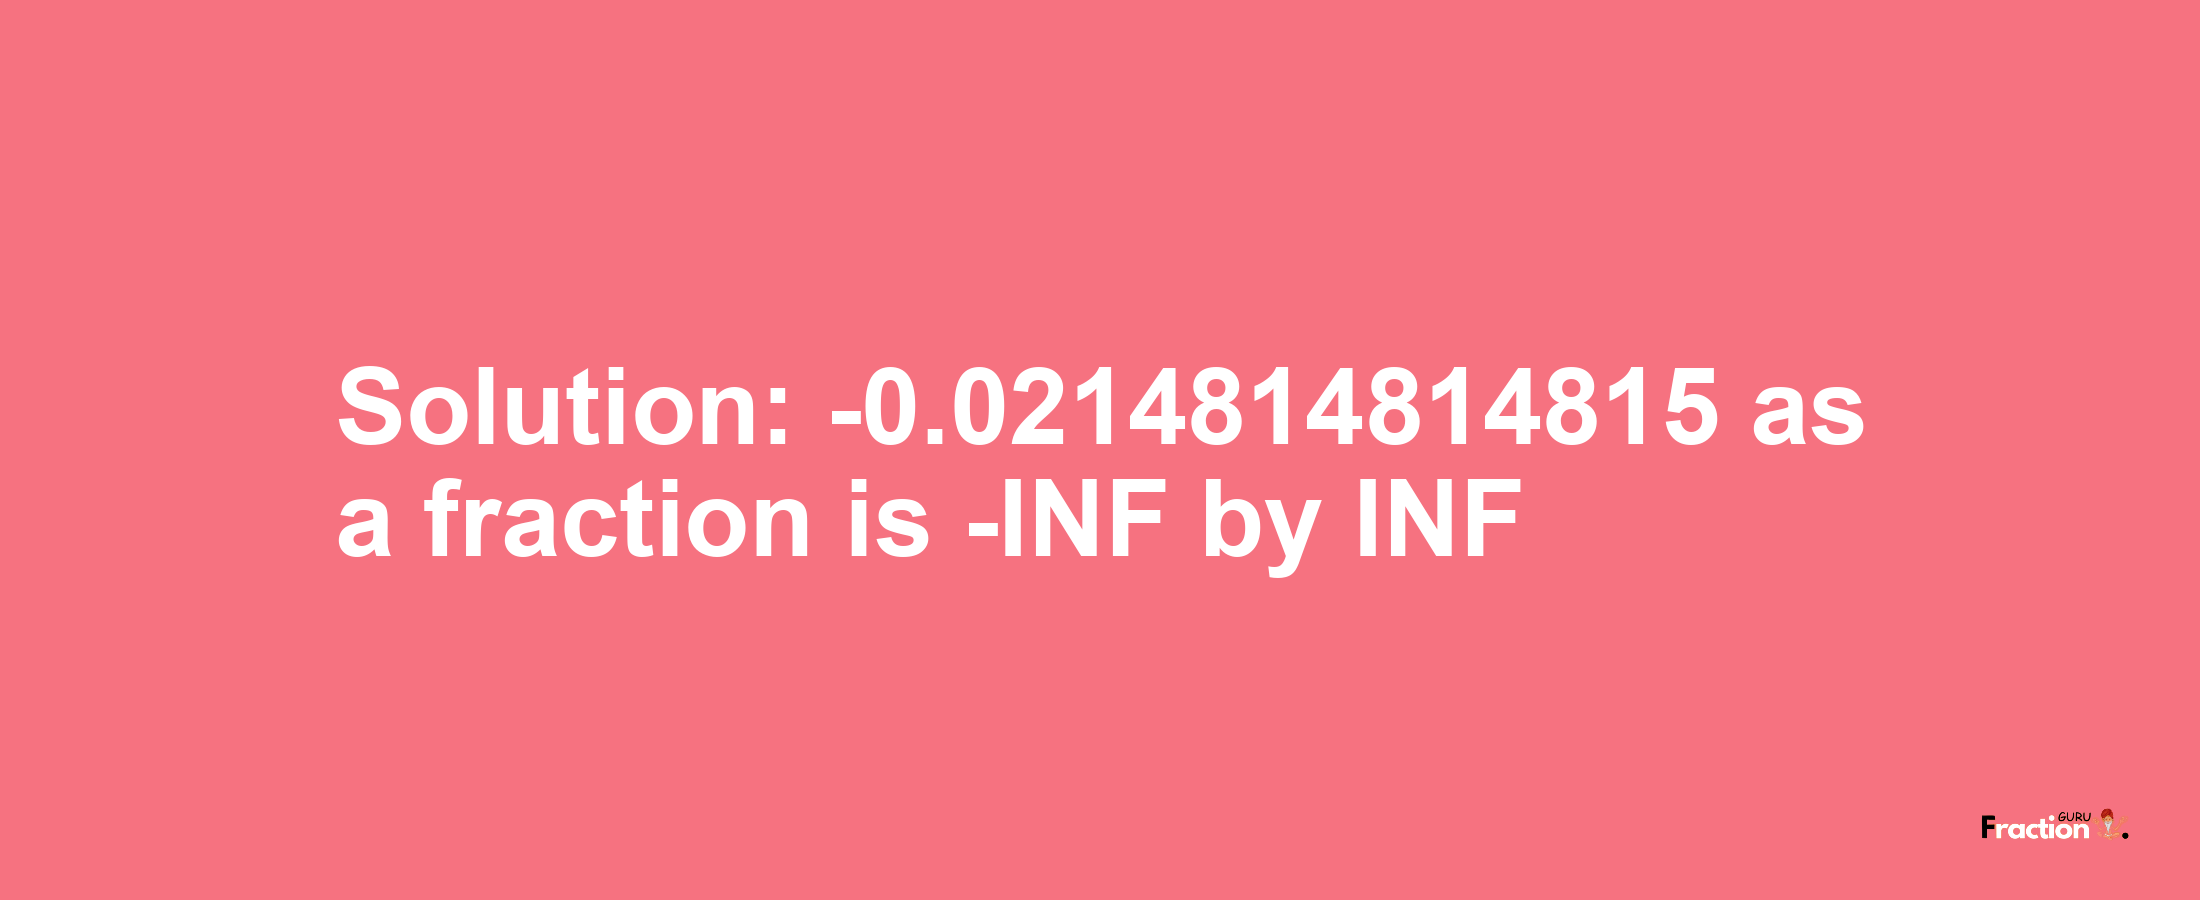 Solution:-0.0214814814815 as a fraction is -INF/INF